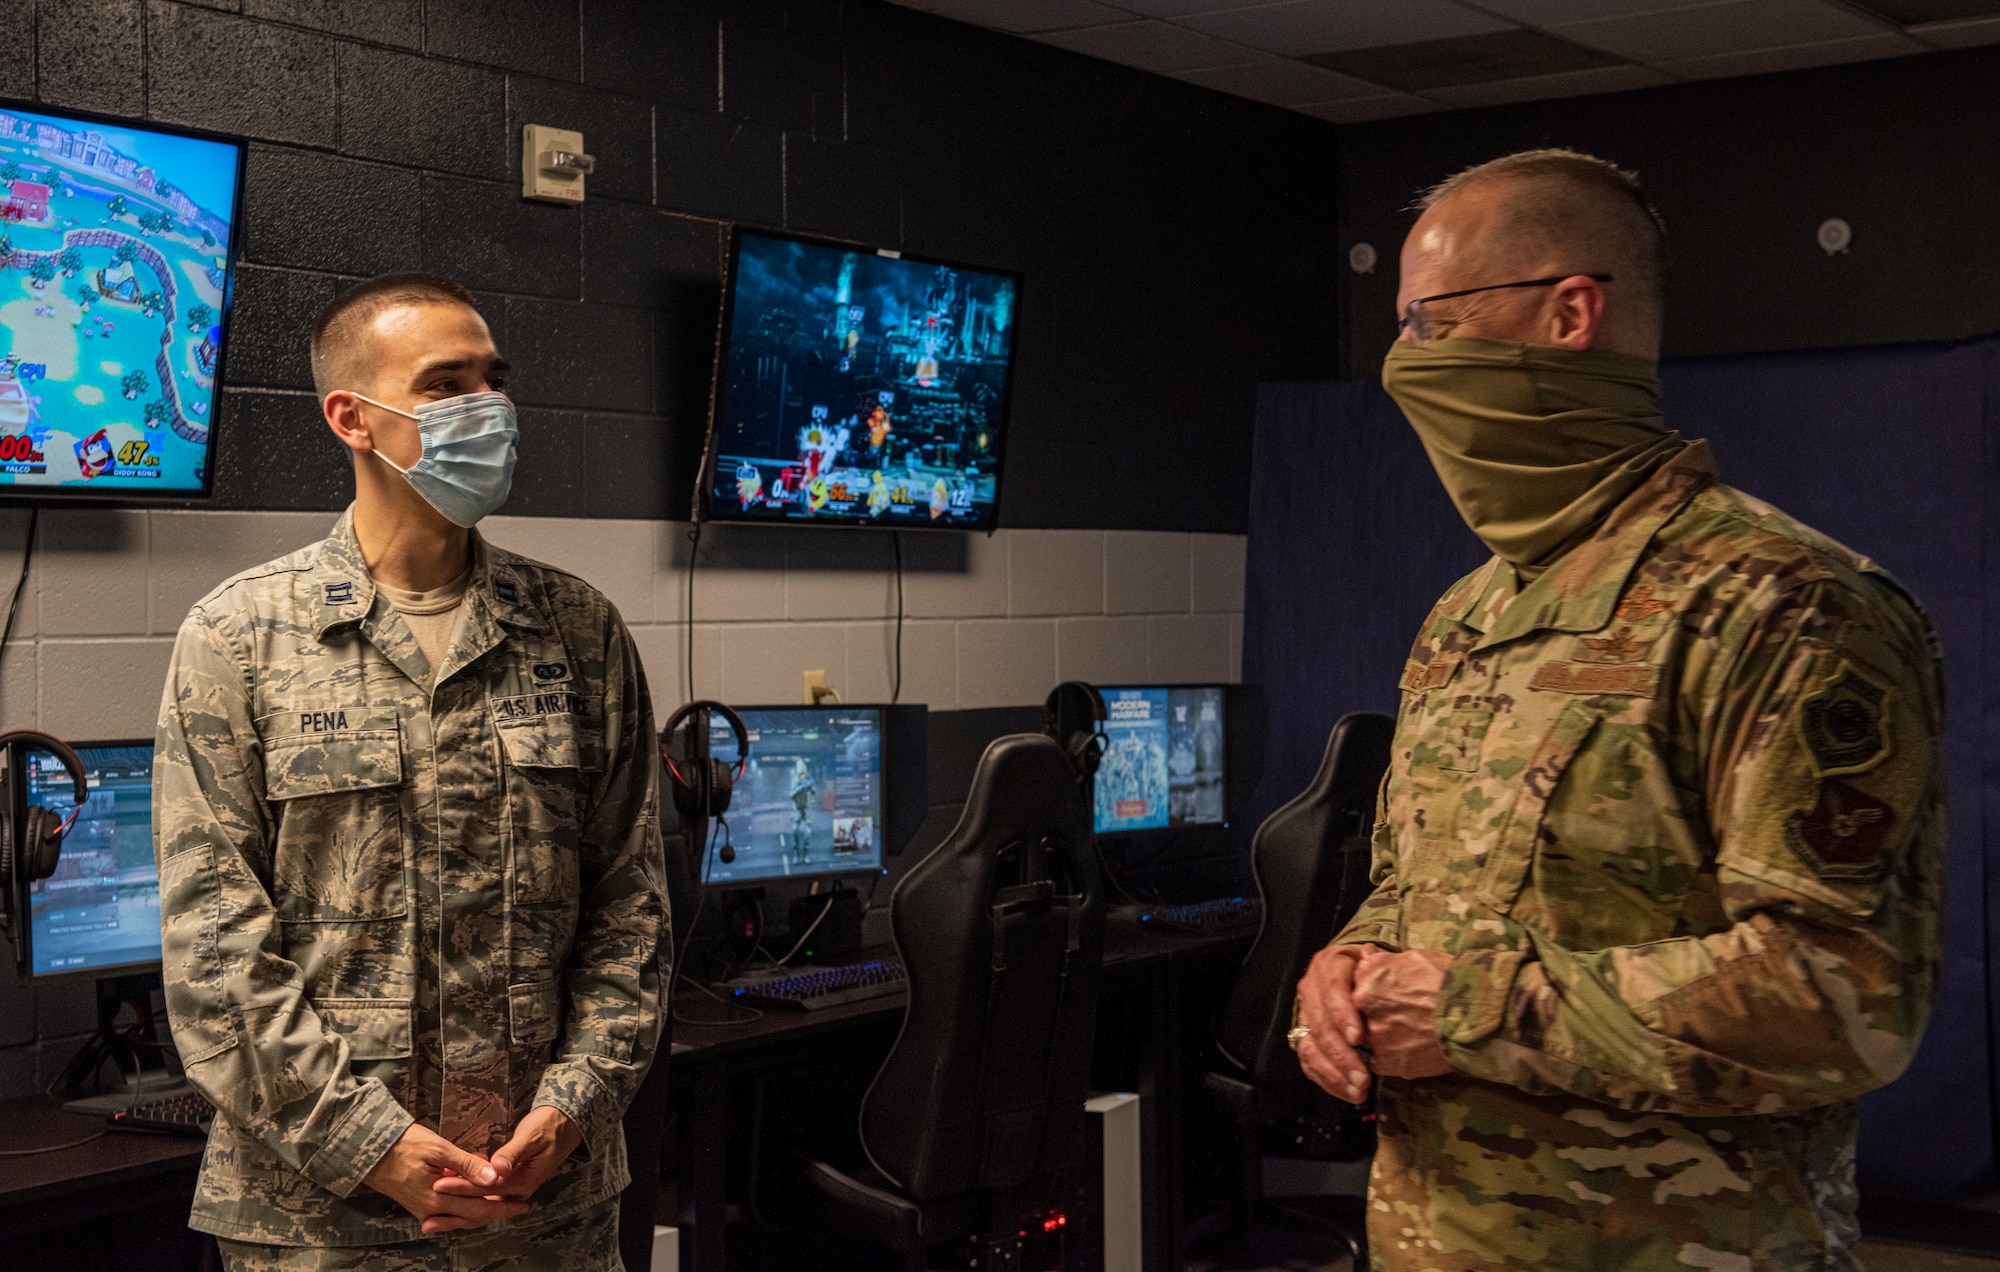 Maj. Gen. Mark Weatherington, 8th Air Force and Joint-Global Strike Operations Center commander, right, questions Capt. Simmon Pena, 7th Force Support Squadron military personnel flight commander, about the eSports program at Dyess Air Force Base, Texas, Aug. 11, 2020.